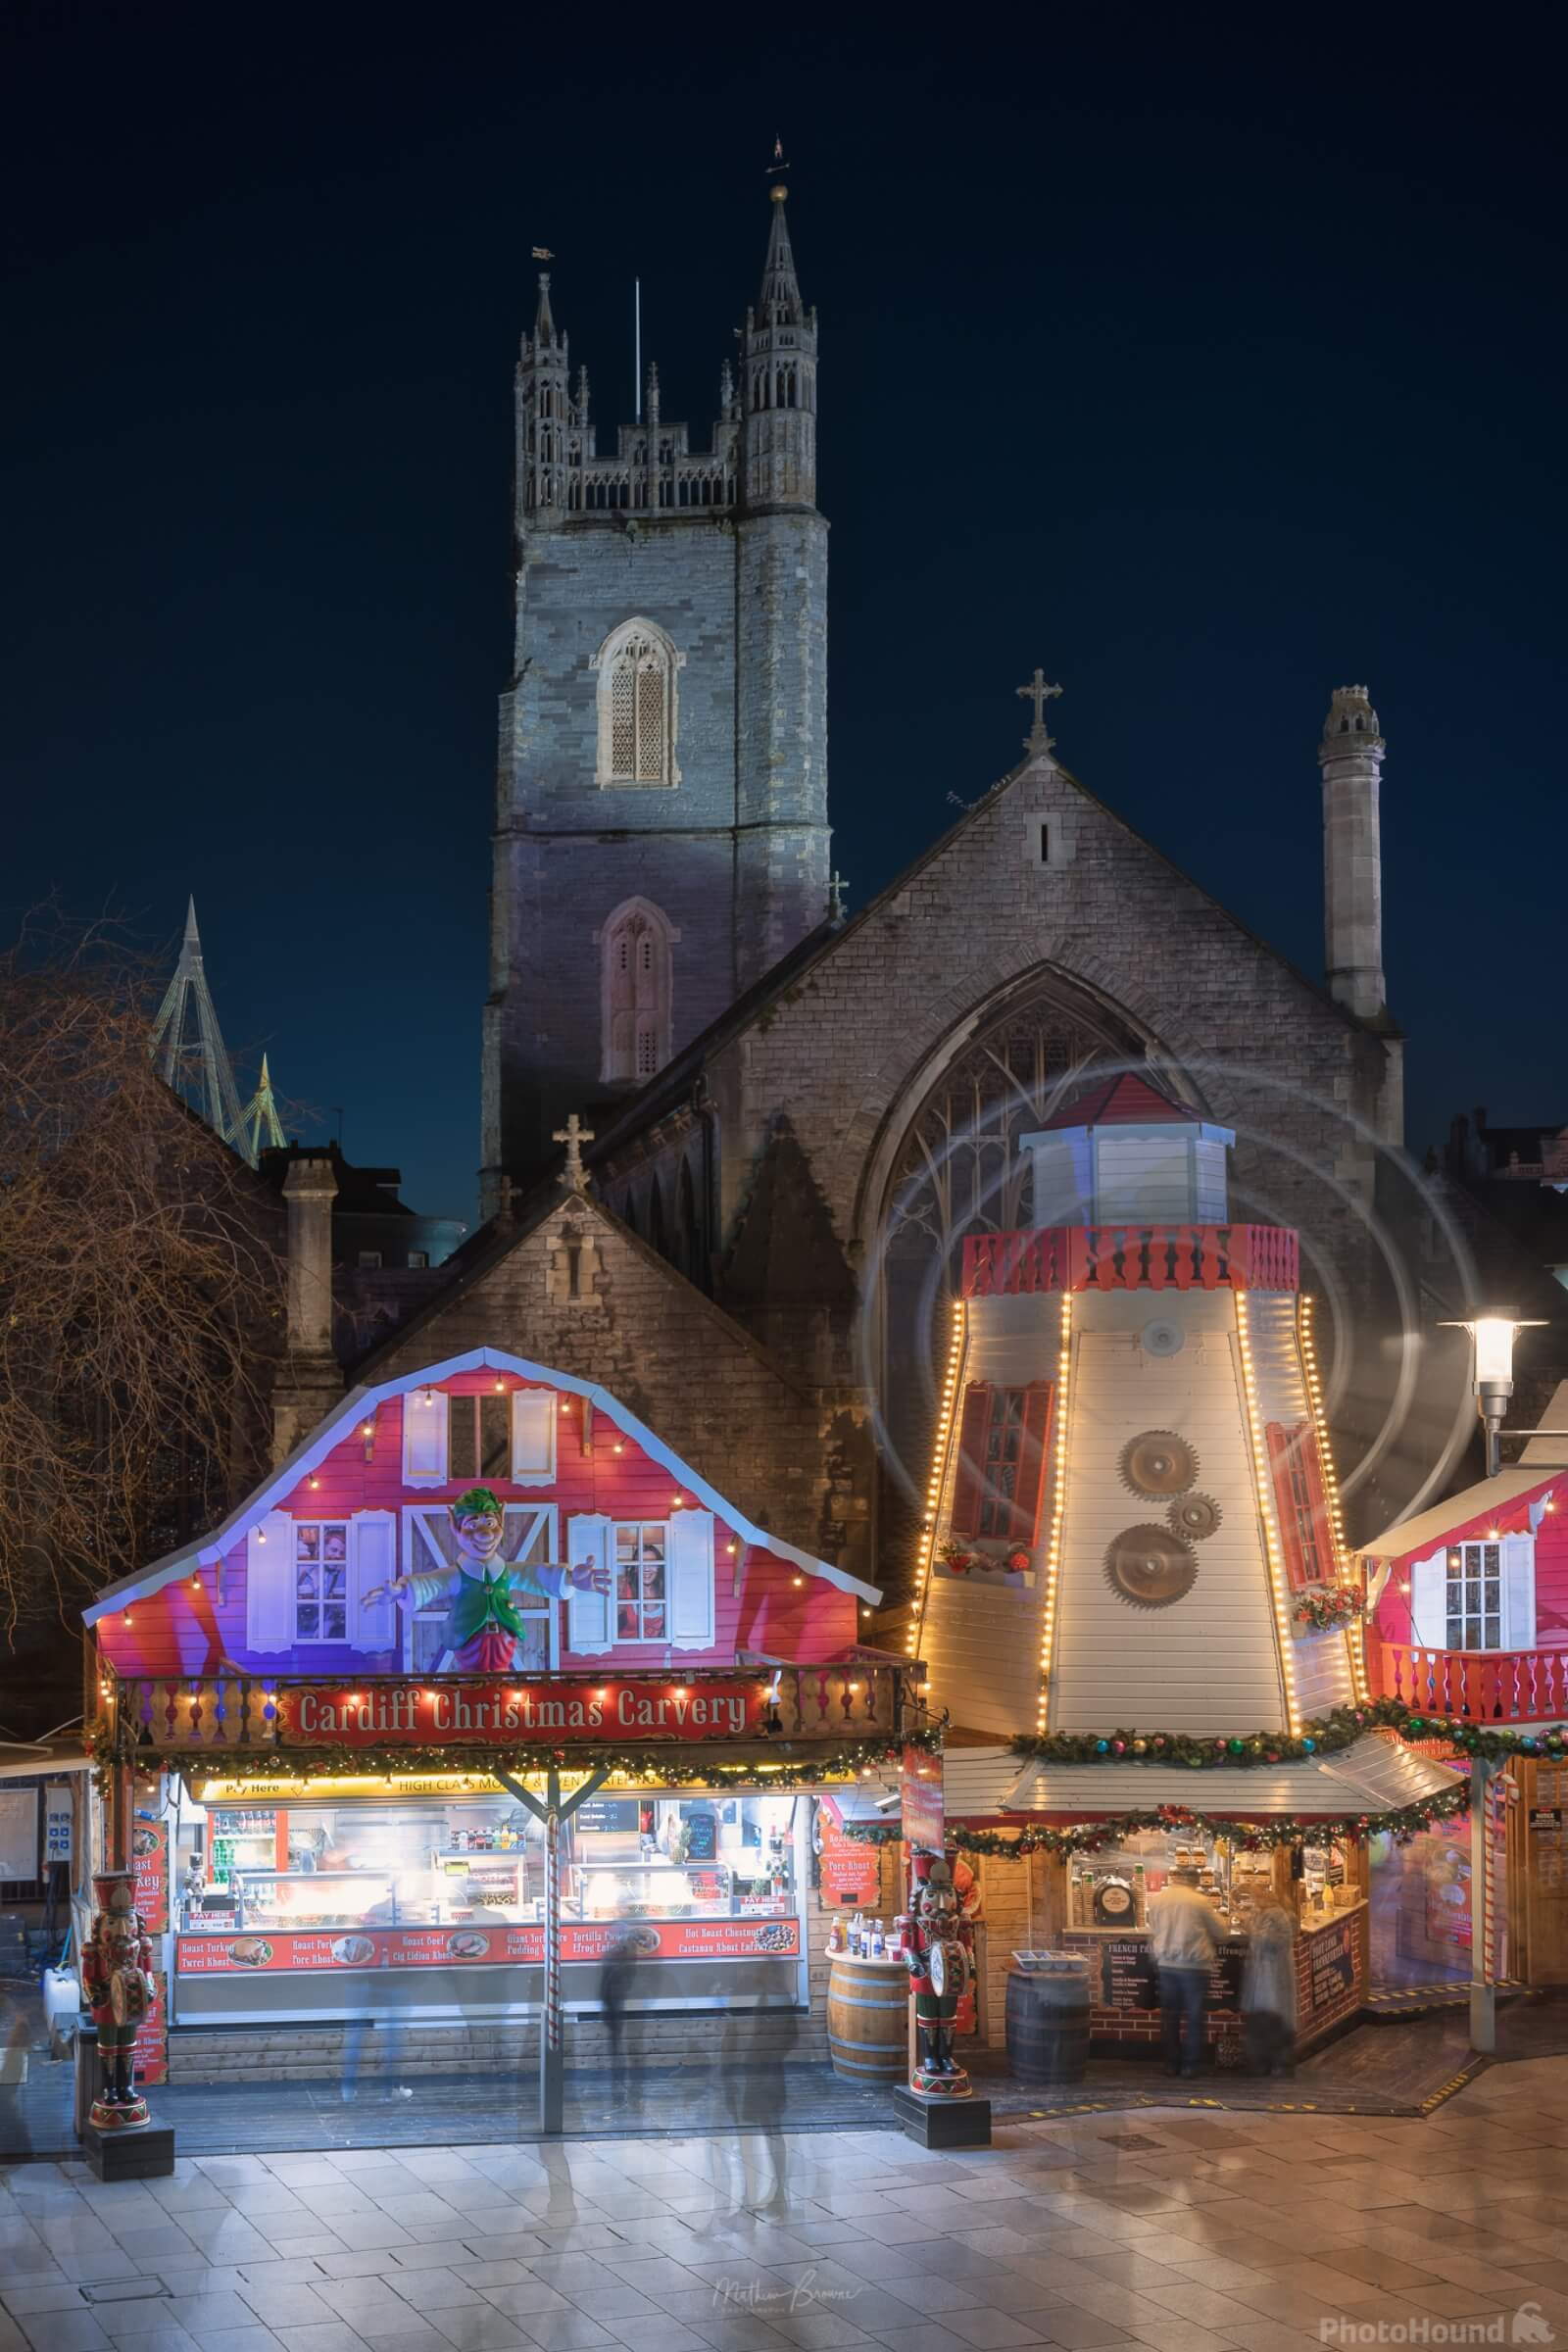 Image of Cardiff Christmas Market by Mathew Browne